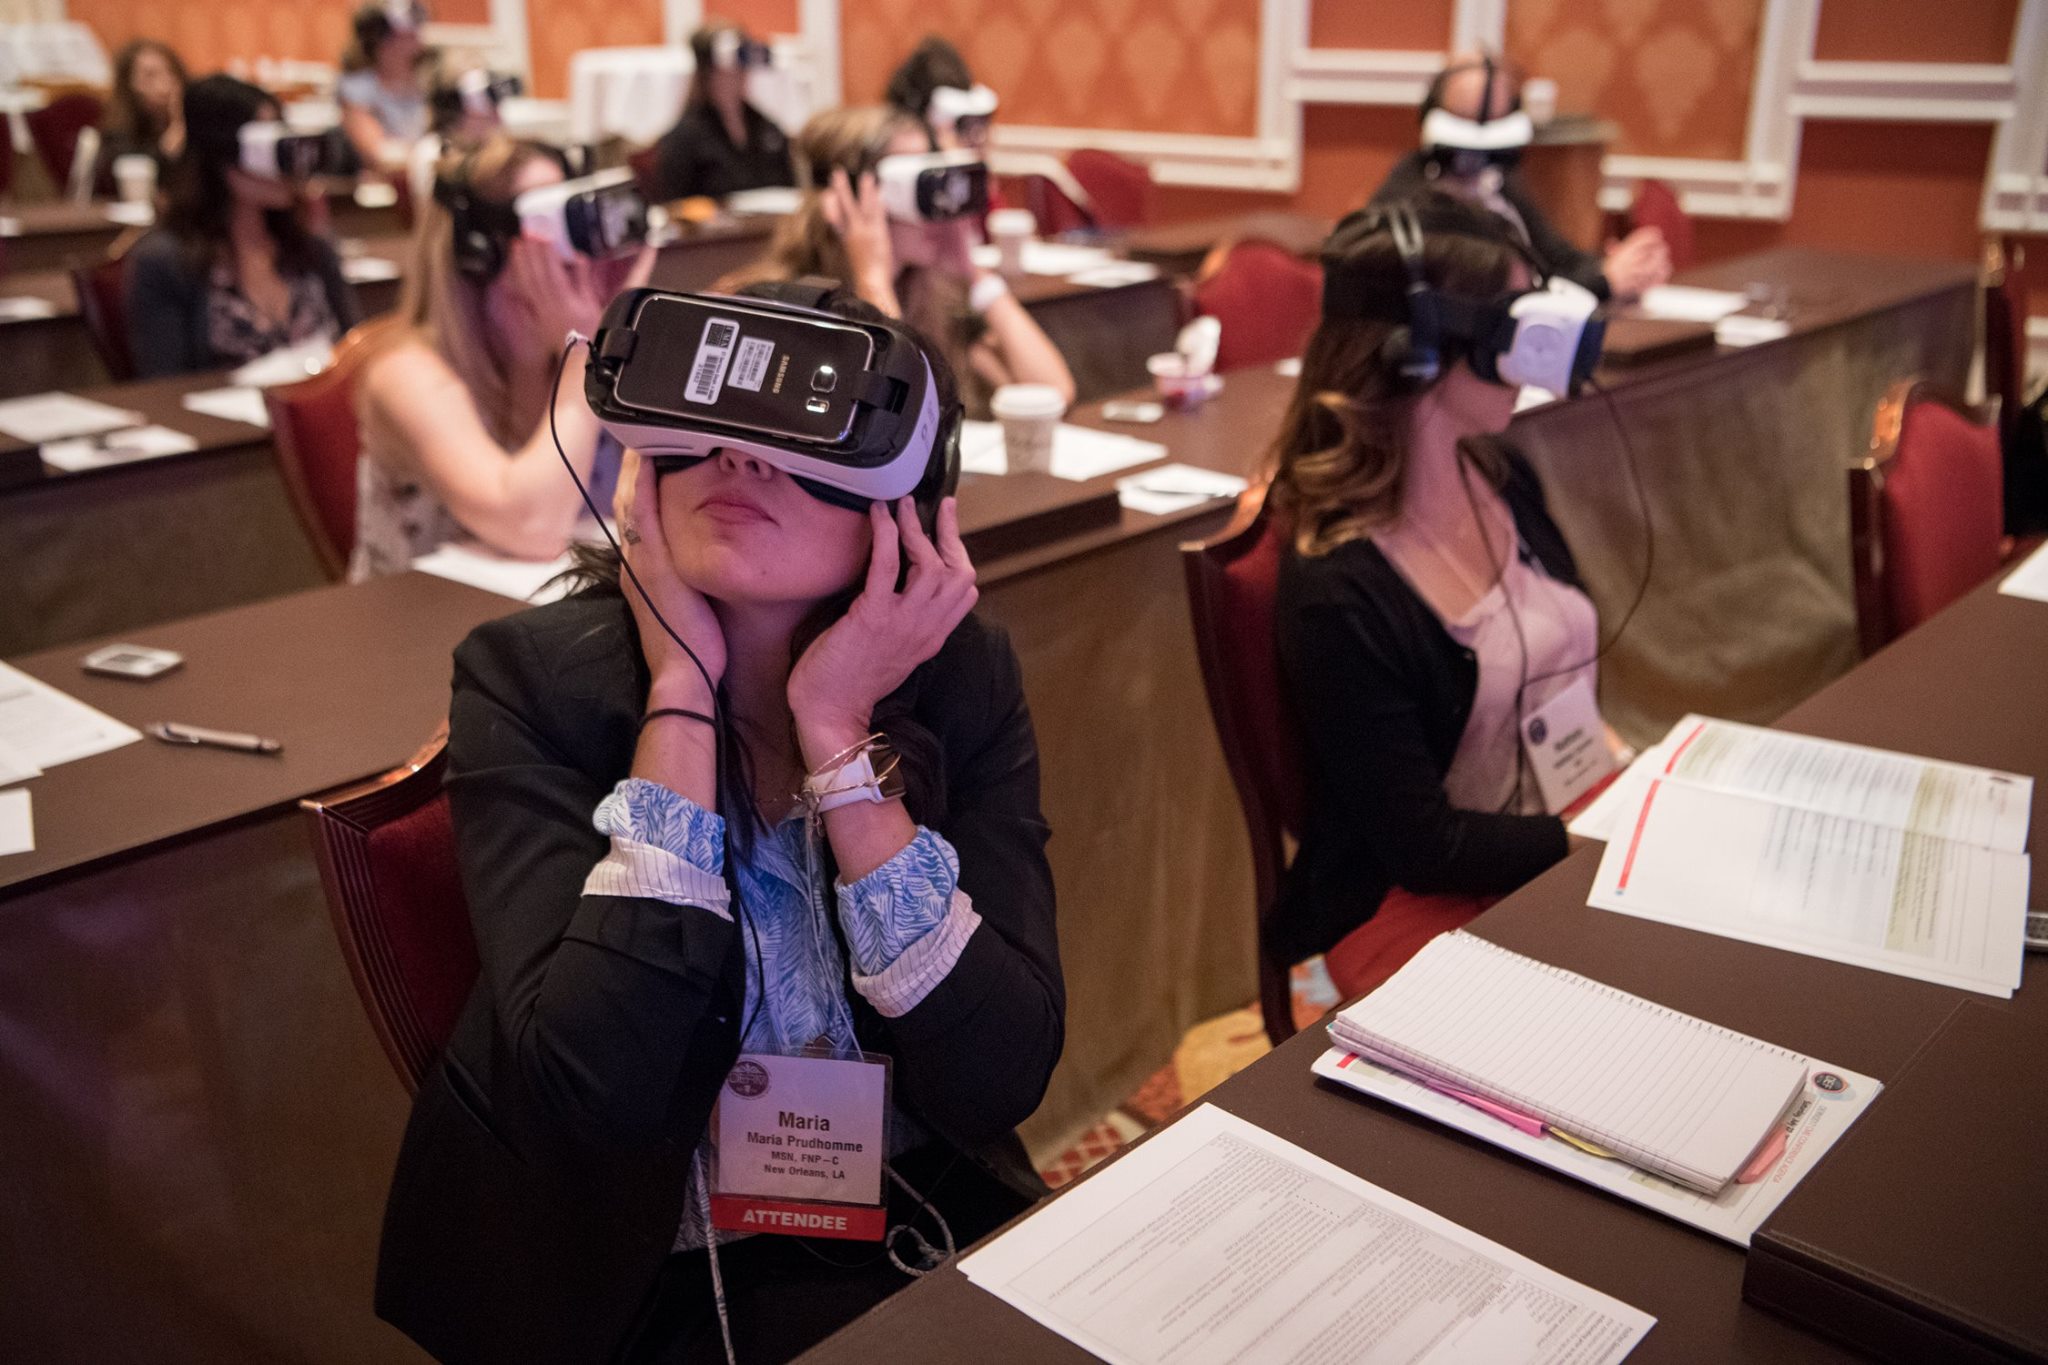 conference attendees using virtual reality headsets